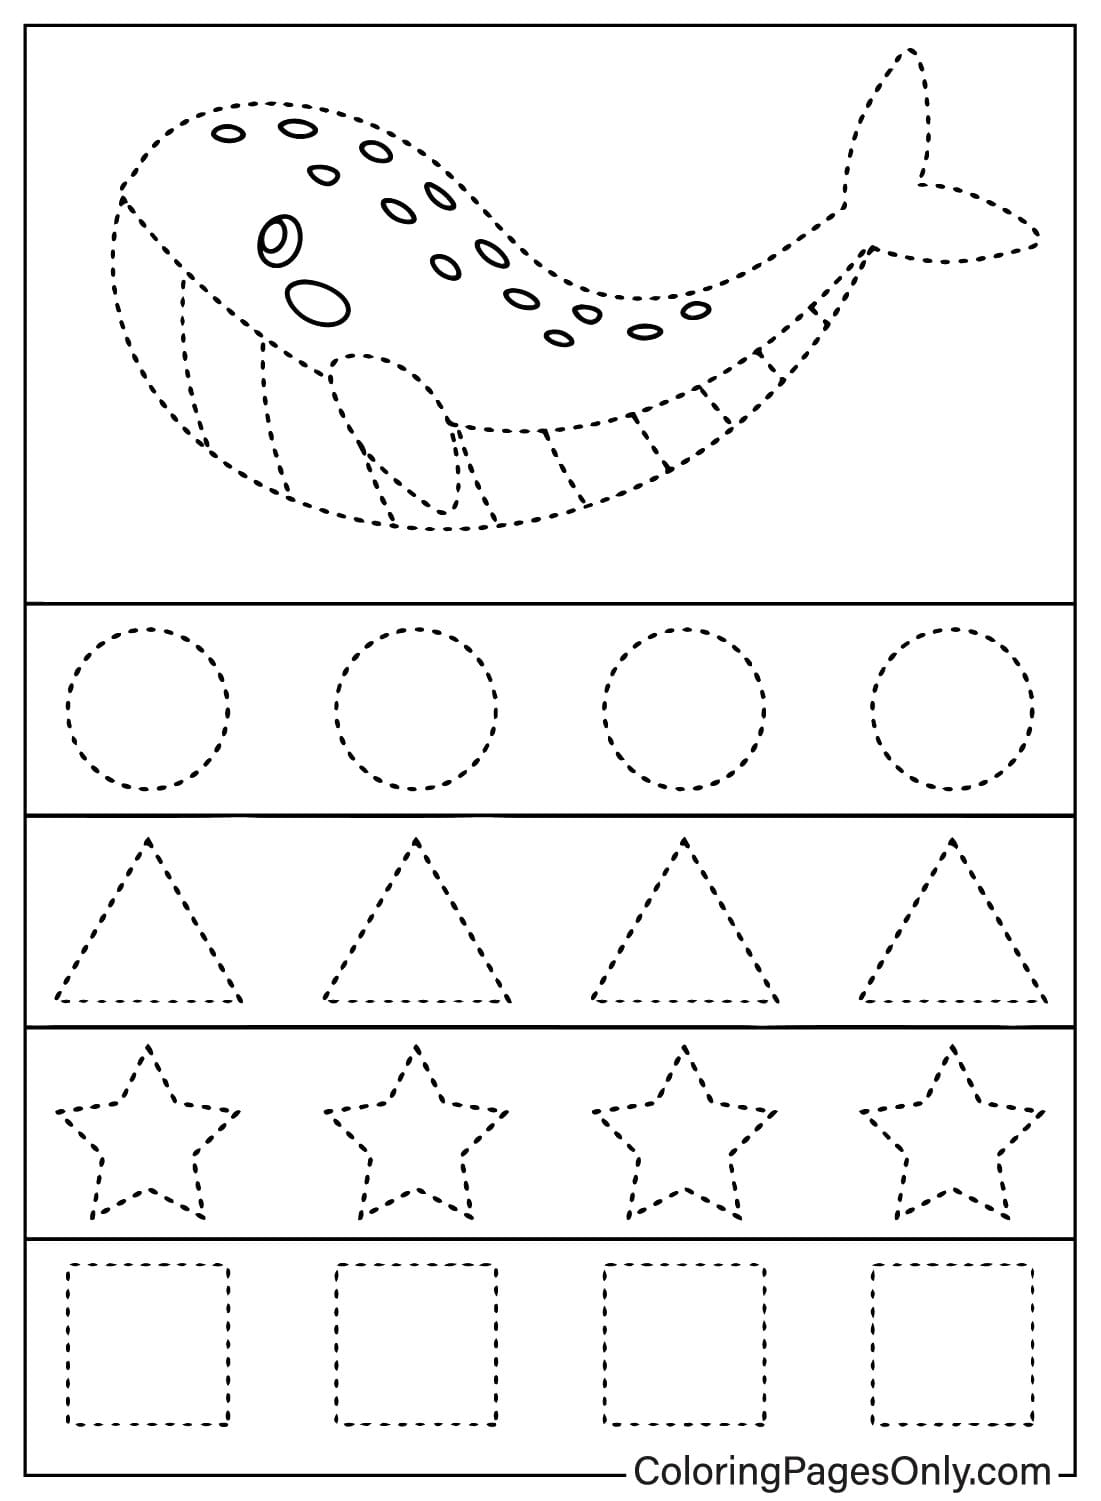 free printable coloring page airplanes